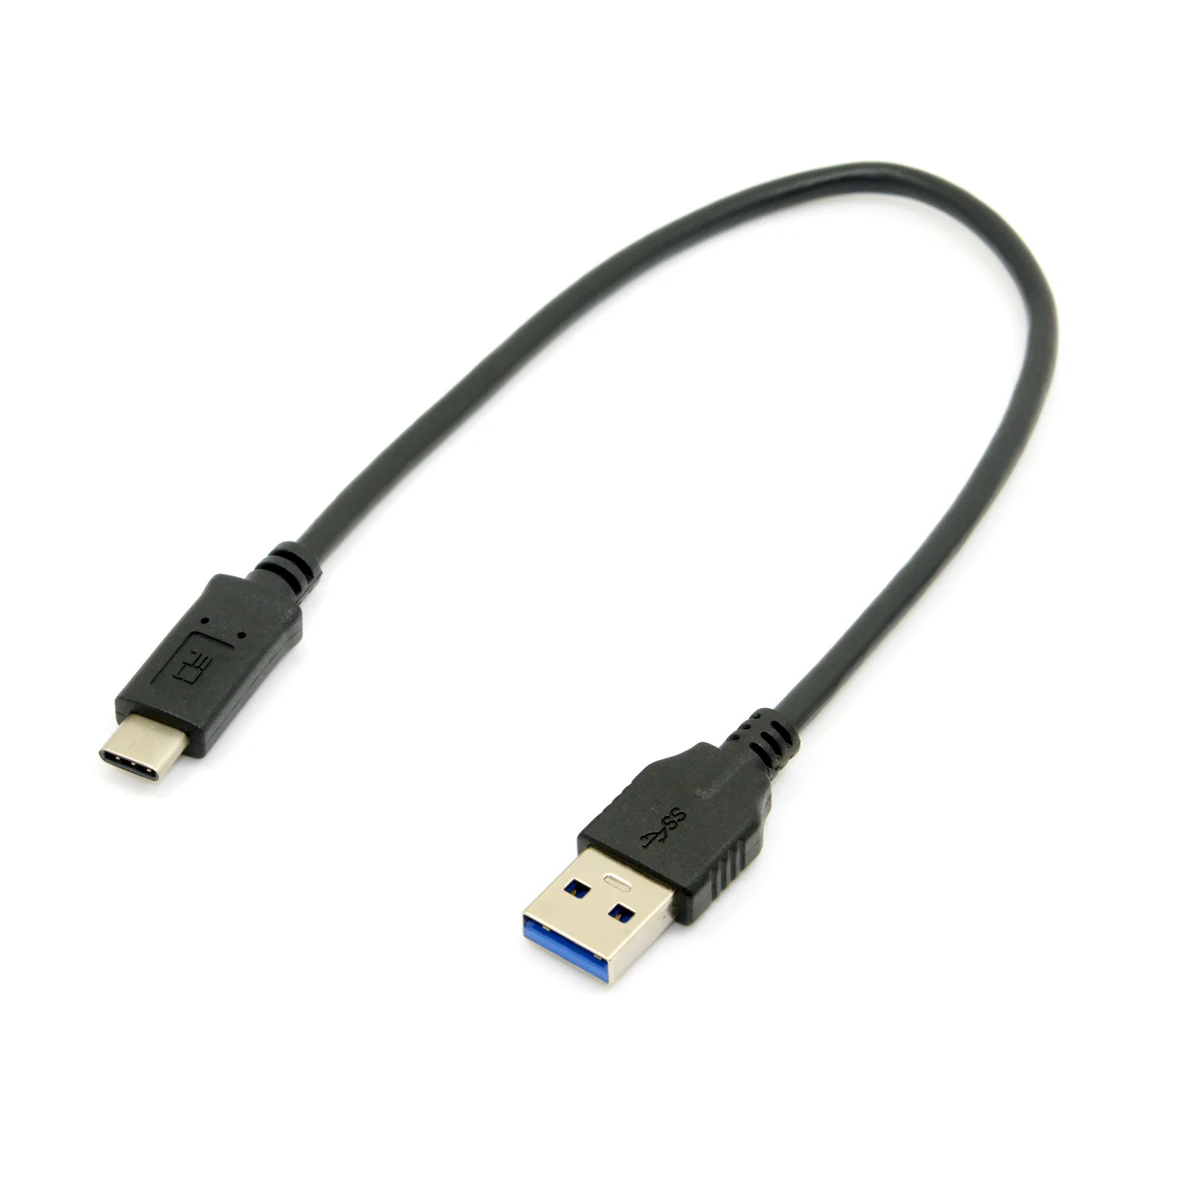 

CY 30cm USB-C USB 3.1 Type C Male to Standard Type A Male Data Cable for Nokia N1 Tablet & Phone & Laptop & Hard Disk Drive